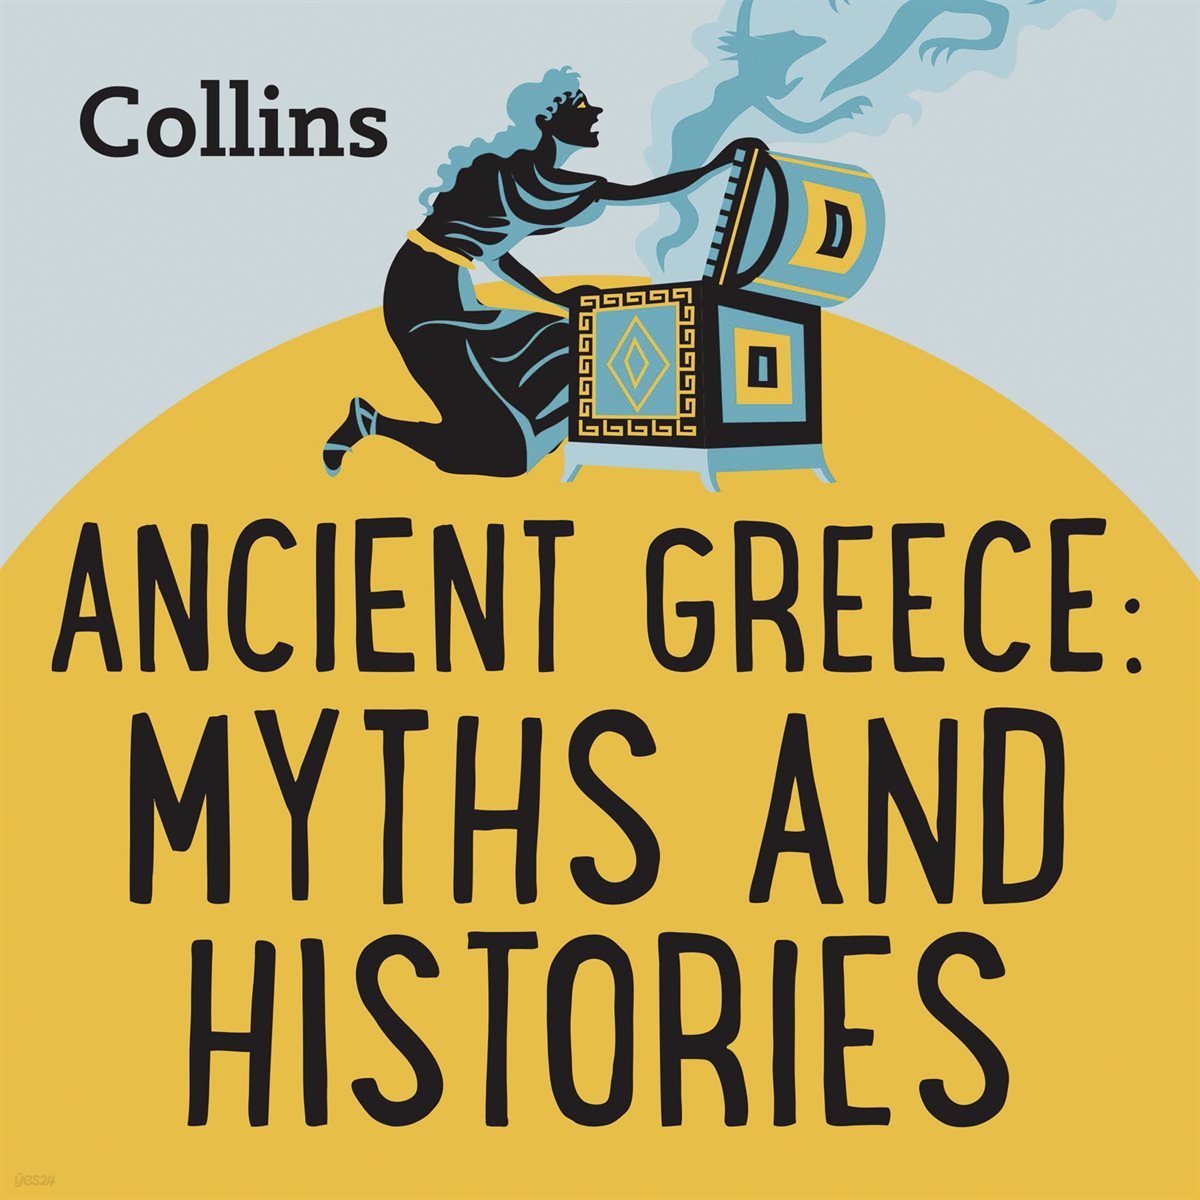 [US Eng] ANCIENT GREECE: MYTHS & HISTORIES: For ages 7-11 -Collins